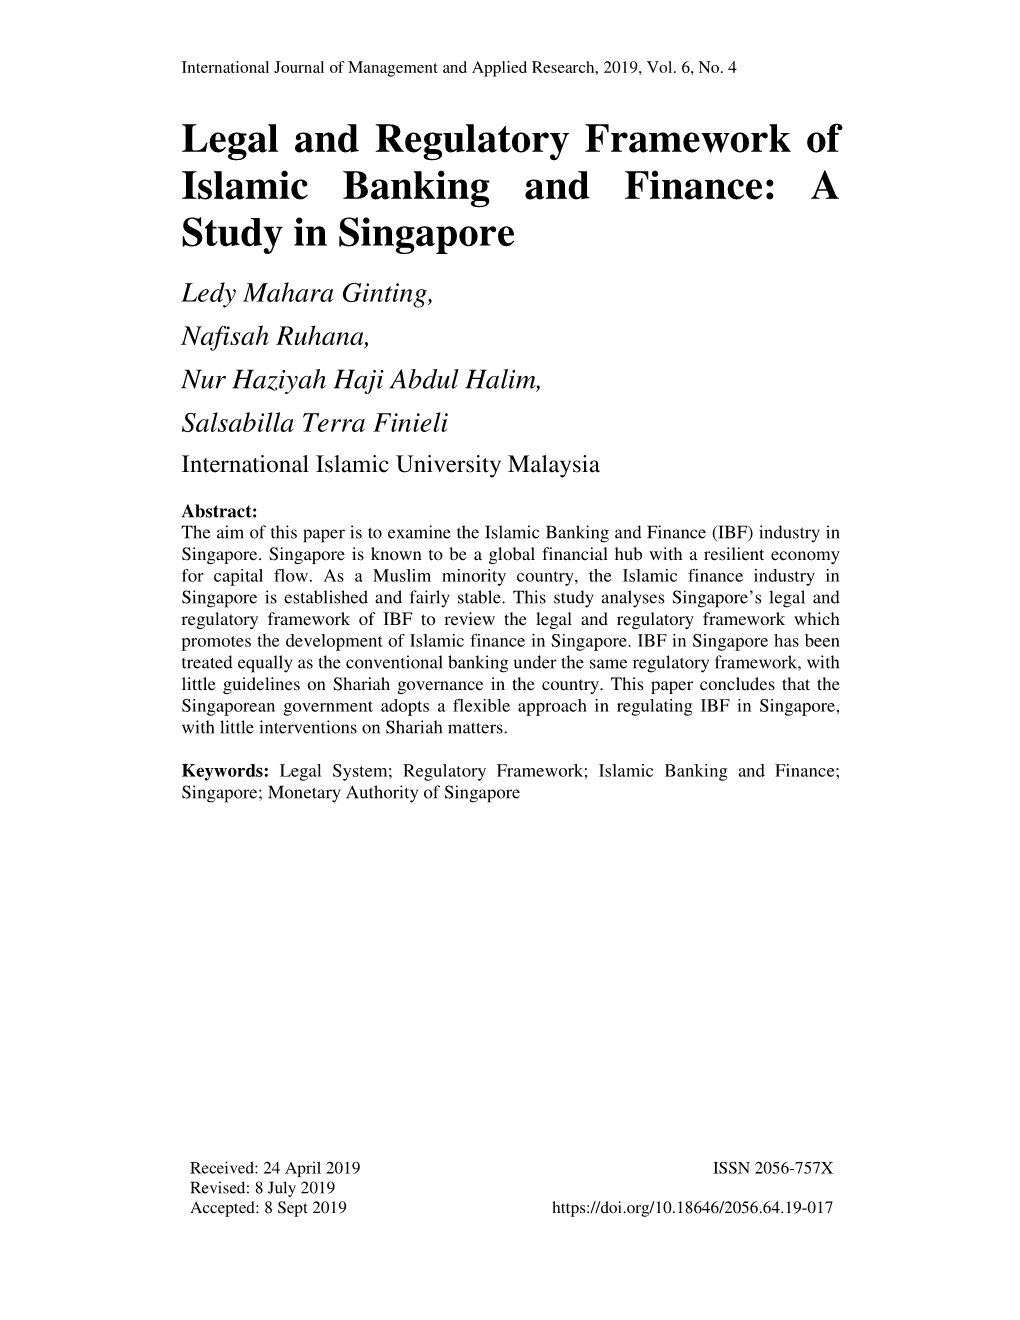 Legal and Regulatory Framework of Islamic Banking and Finance: a Study in Singapore